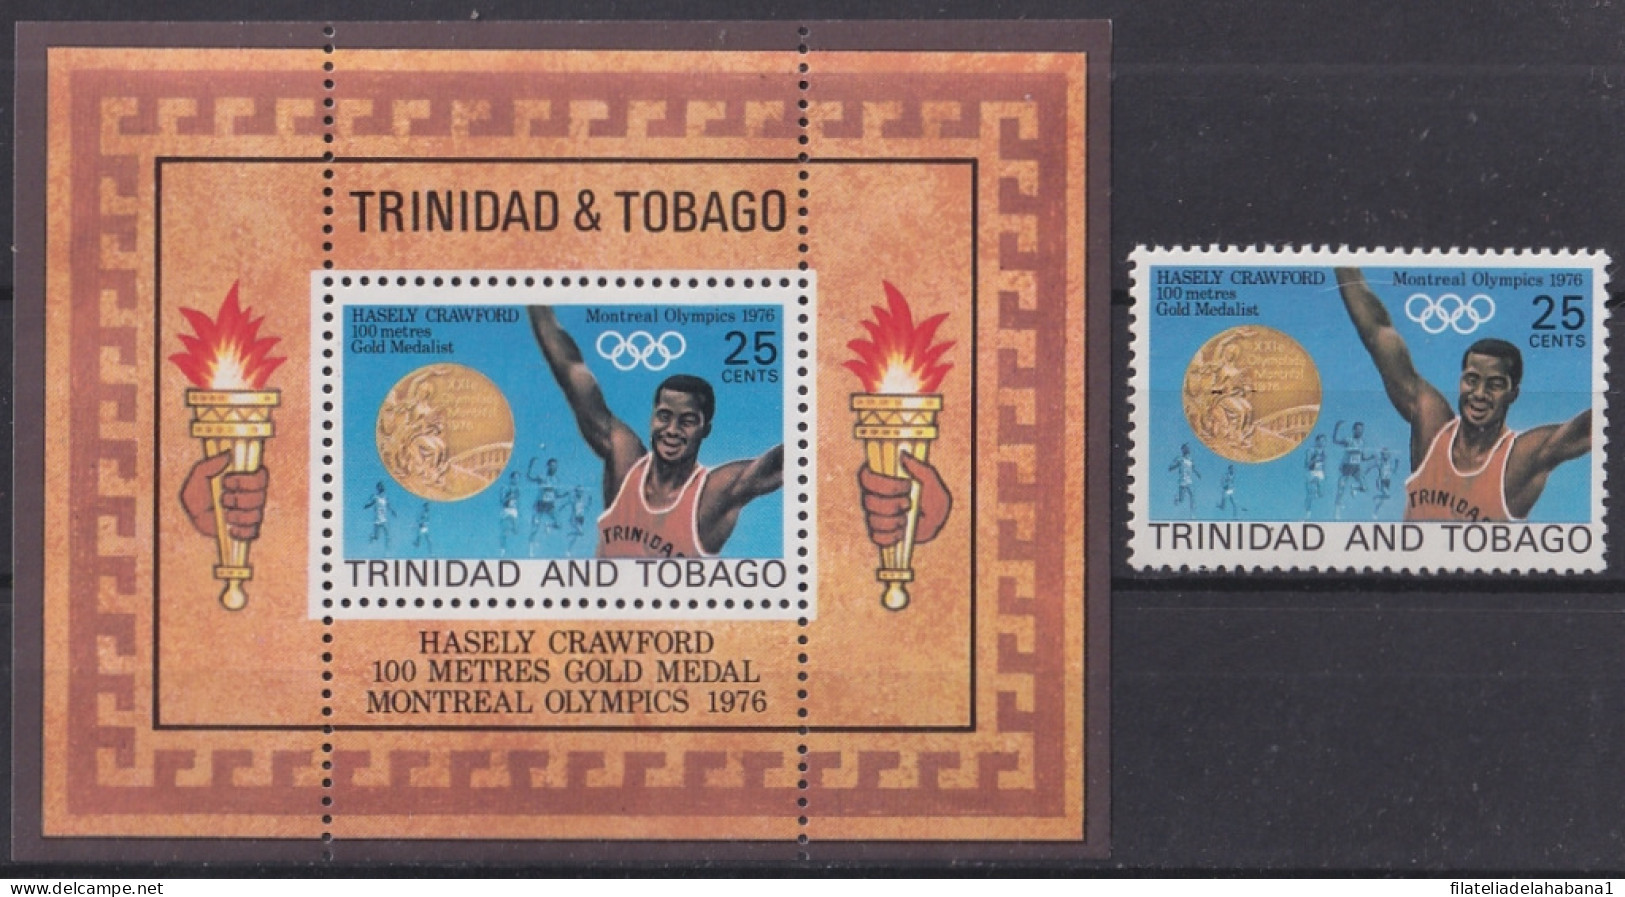 F-EX47644 TRINIDAD & TOBAGO MNH 1977 MONTREAL OLYMPIC GAMES ATHLETISM WINNER HASELY CRAWFORD.  - Sommer 1976: Montreal